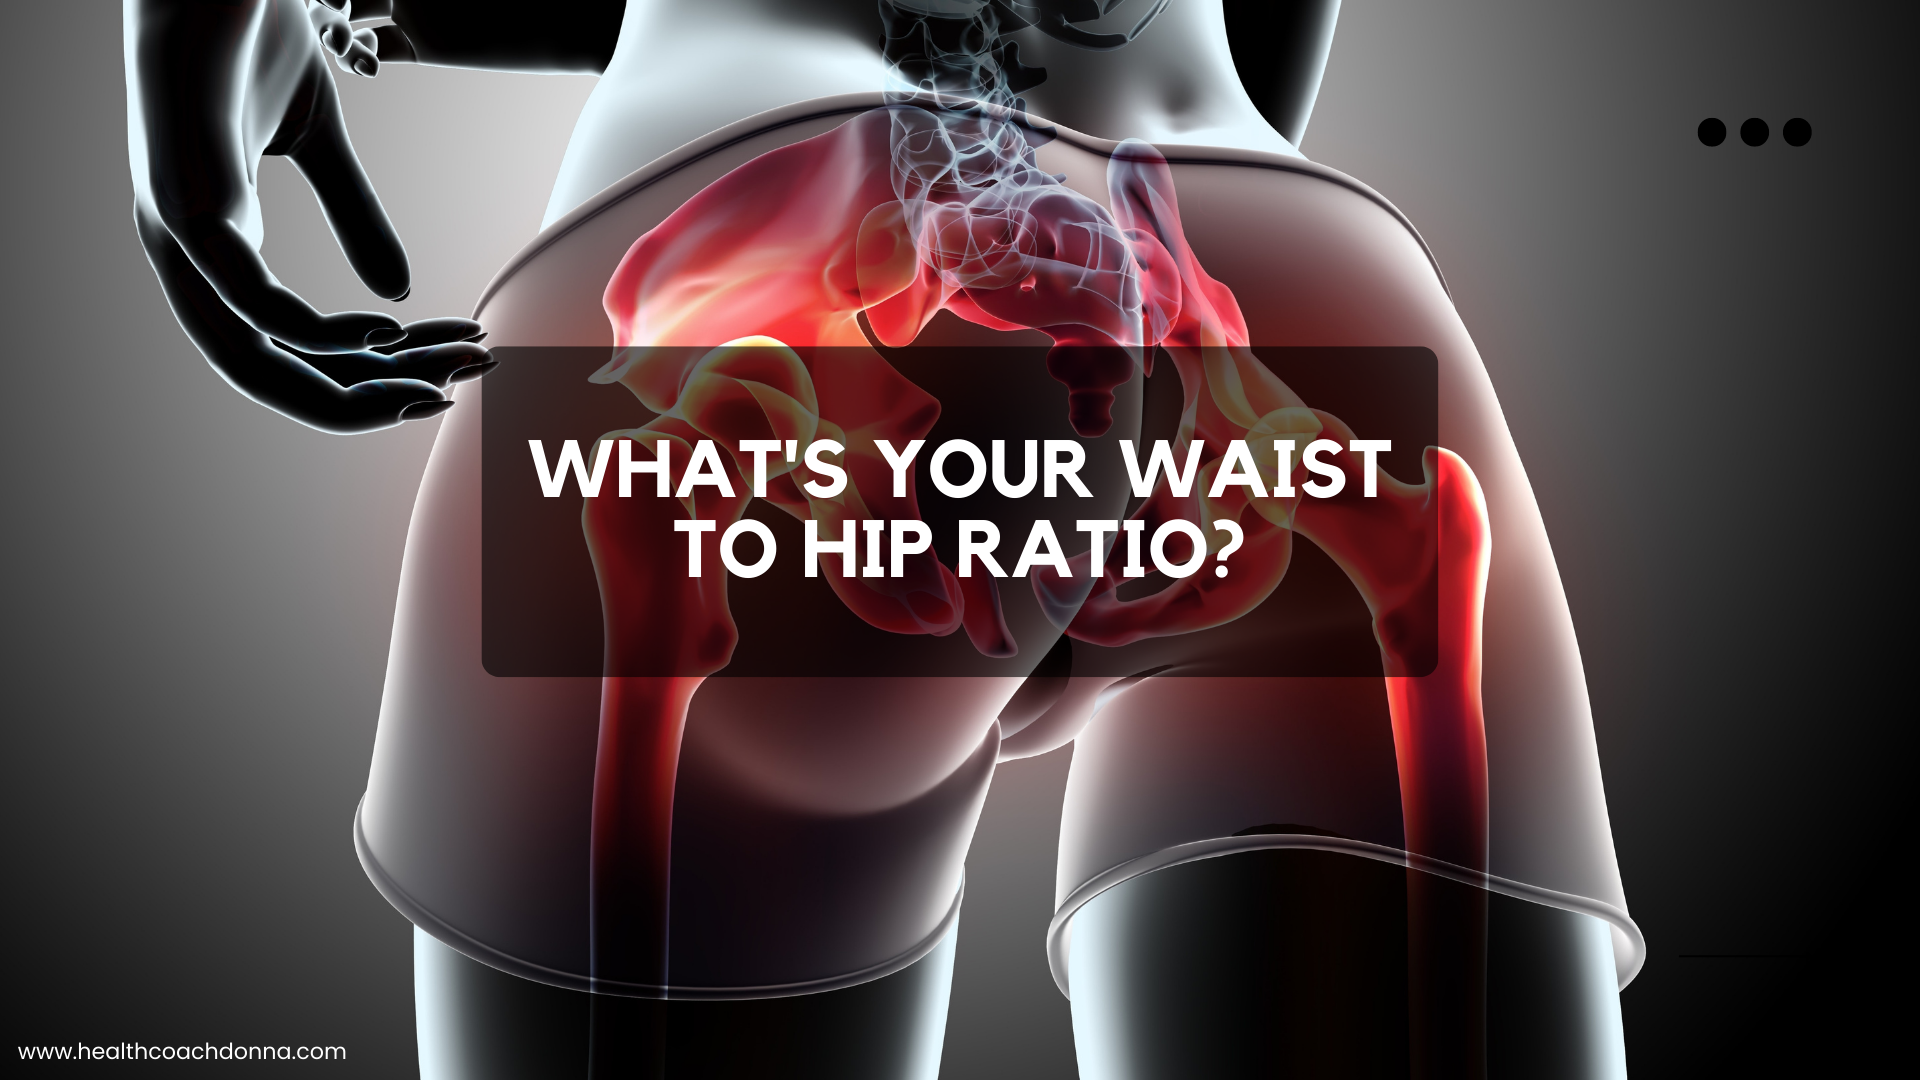 What's Your Waist to Hip Ratio?